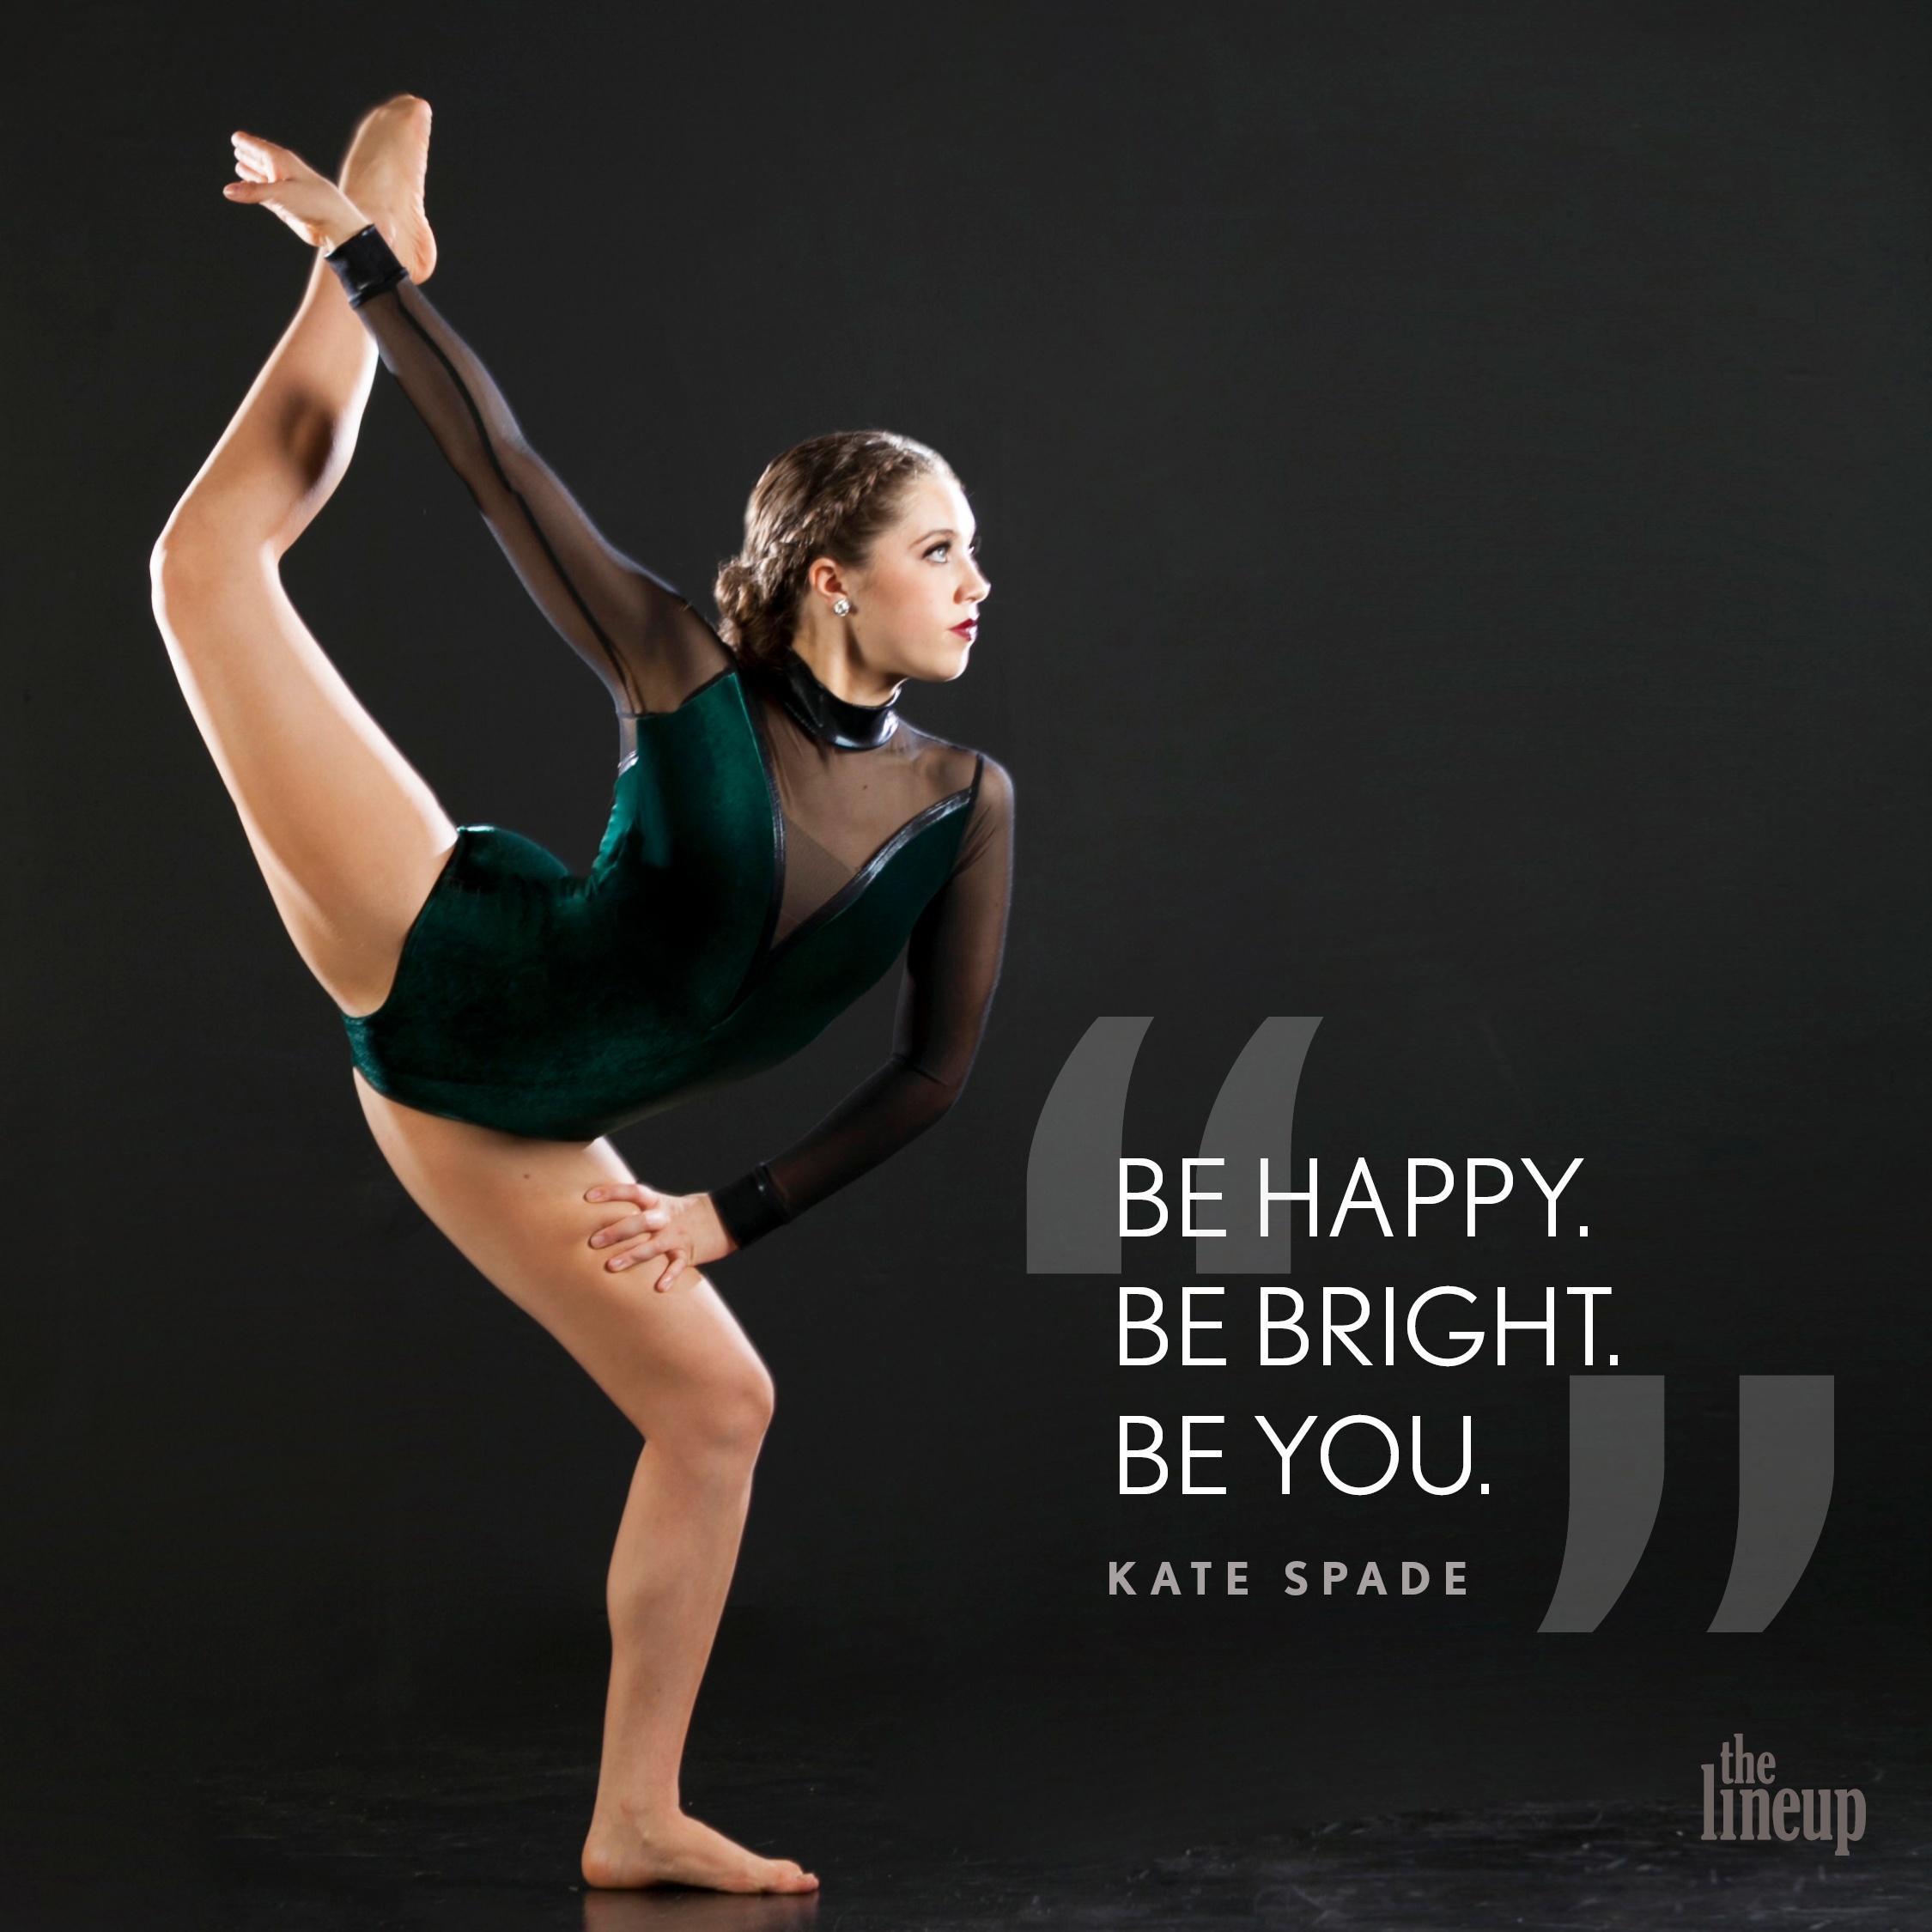 little dance things quotes